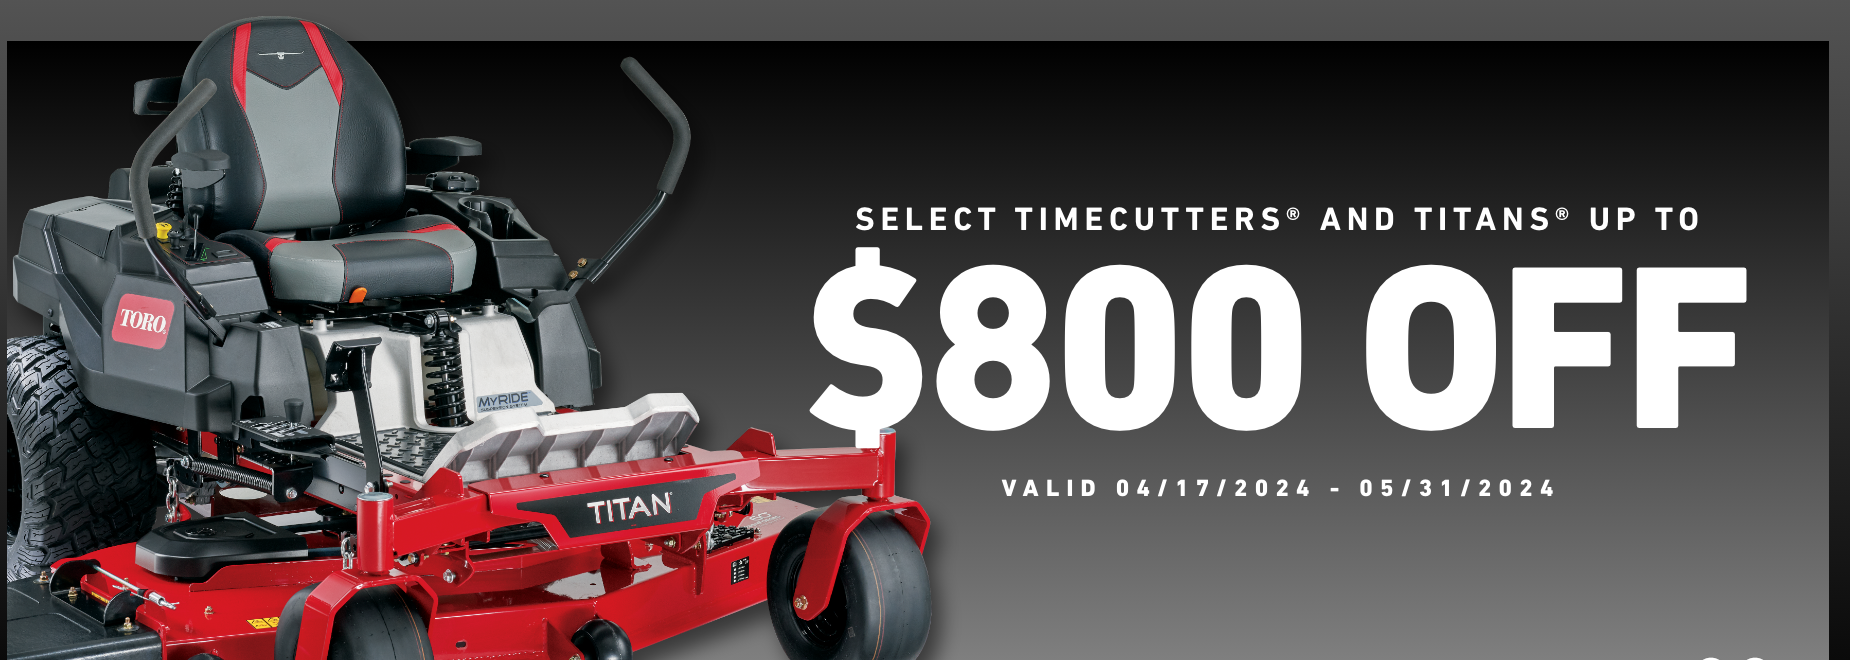 A toro lawn mower is on sale for $ 500 off